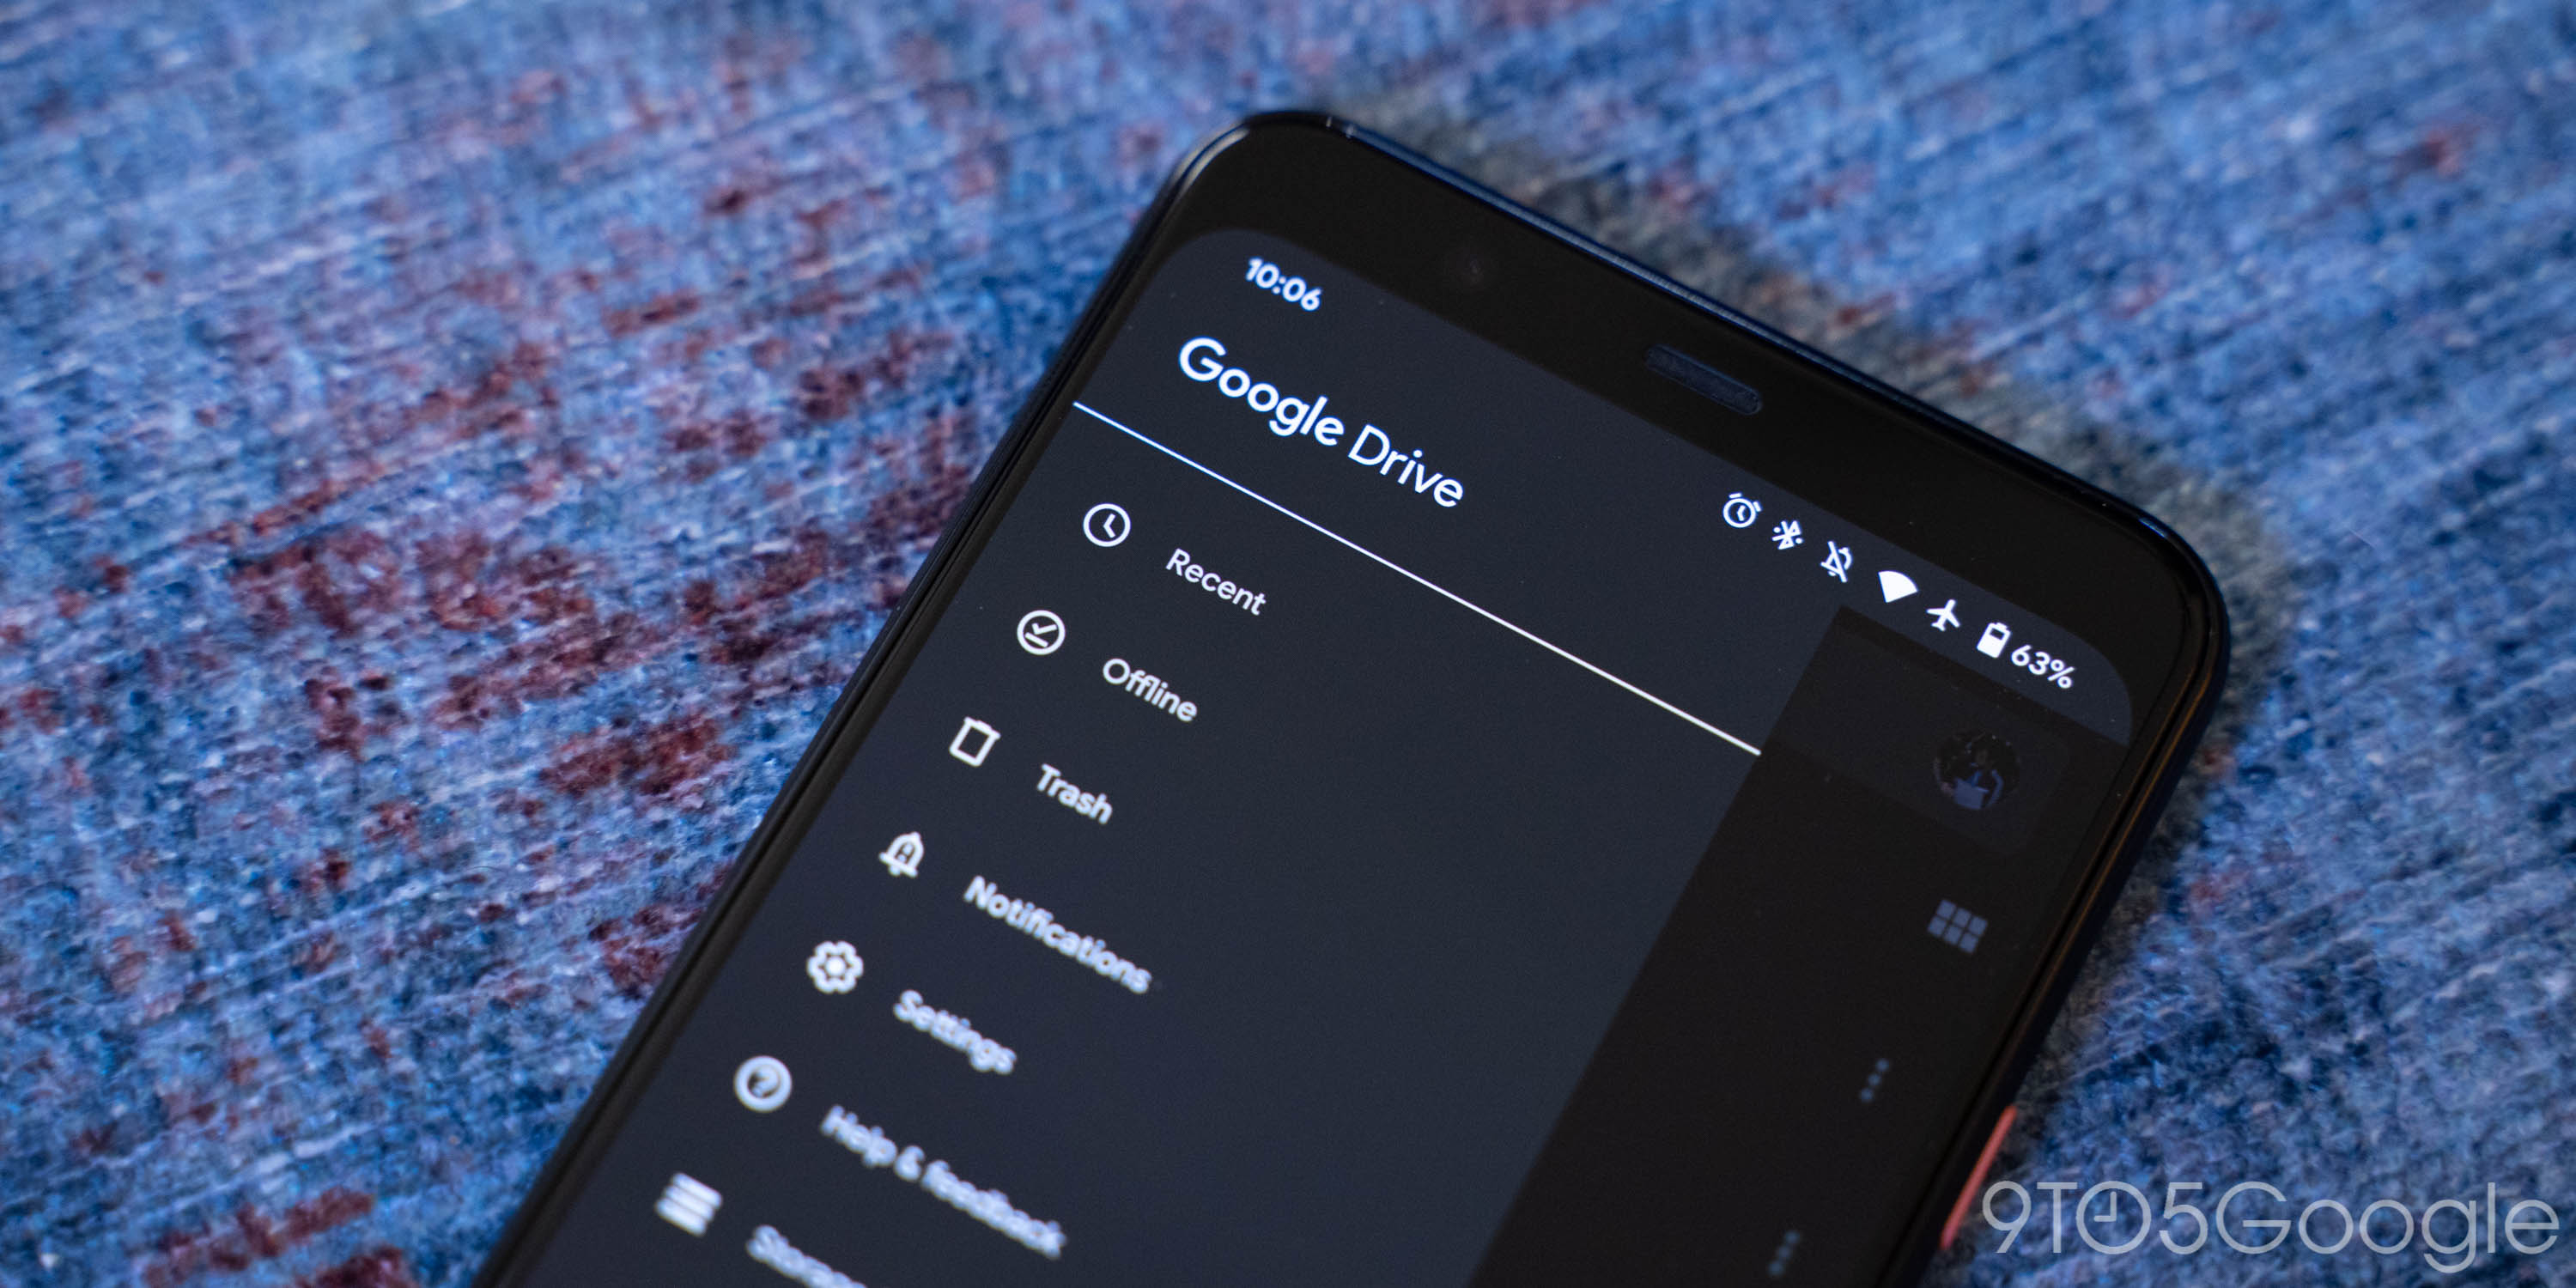 Google Drive adds audio playback speed, notification media player controls on Android